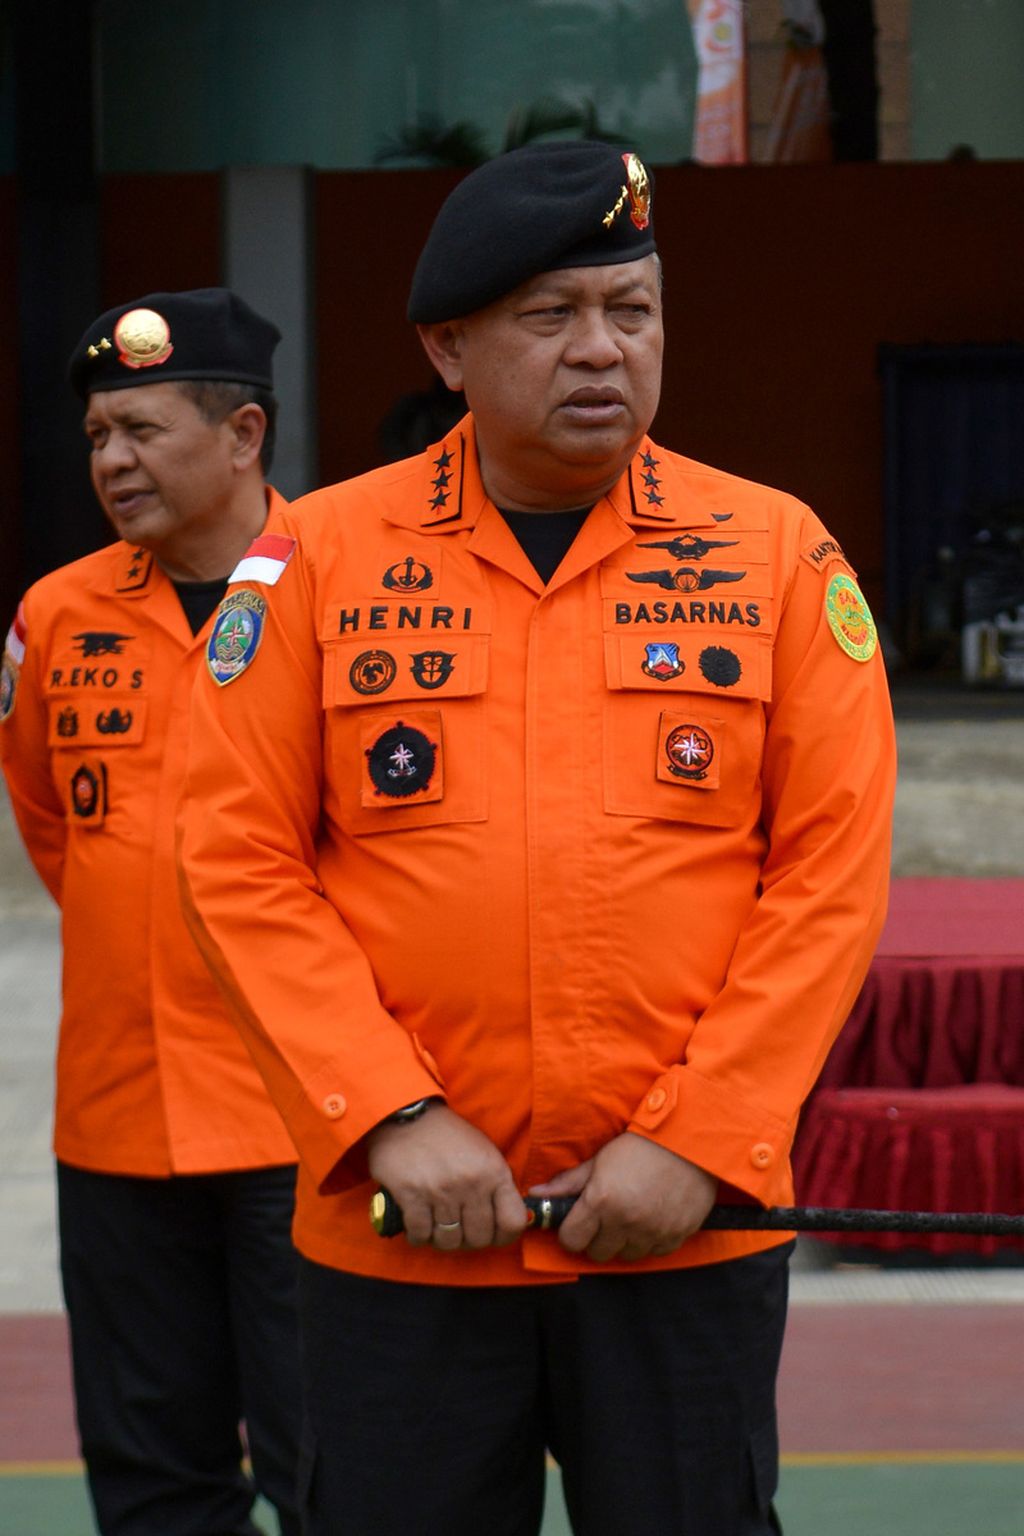 Head of the National Search and Rescue Agency Air Marshal TNI Henri Alfiandi (right) attended the departure ceremony of the INASAR team at the Basarnas Field, Central Jakarta, Friday (10/2/2023).